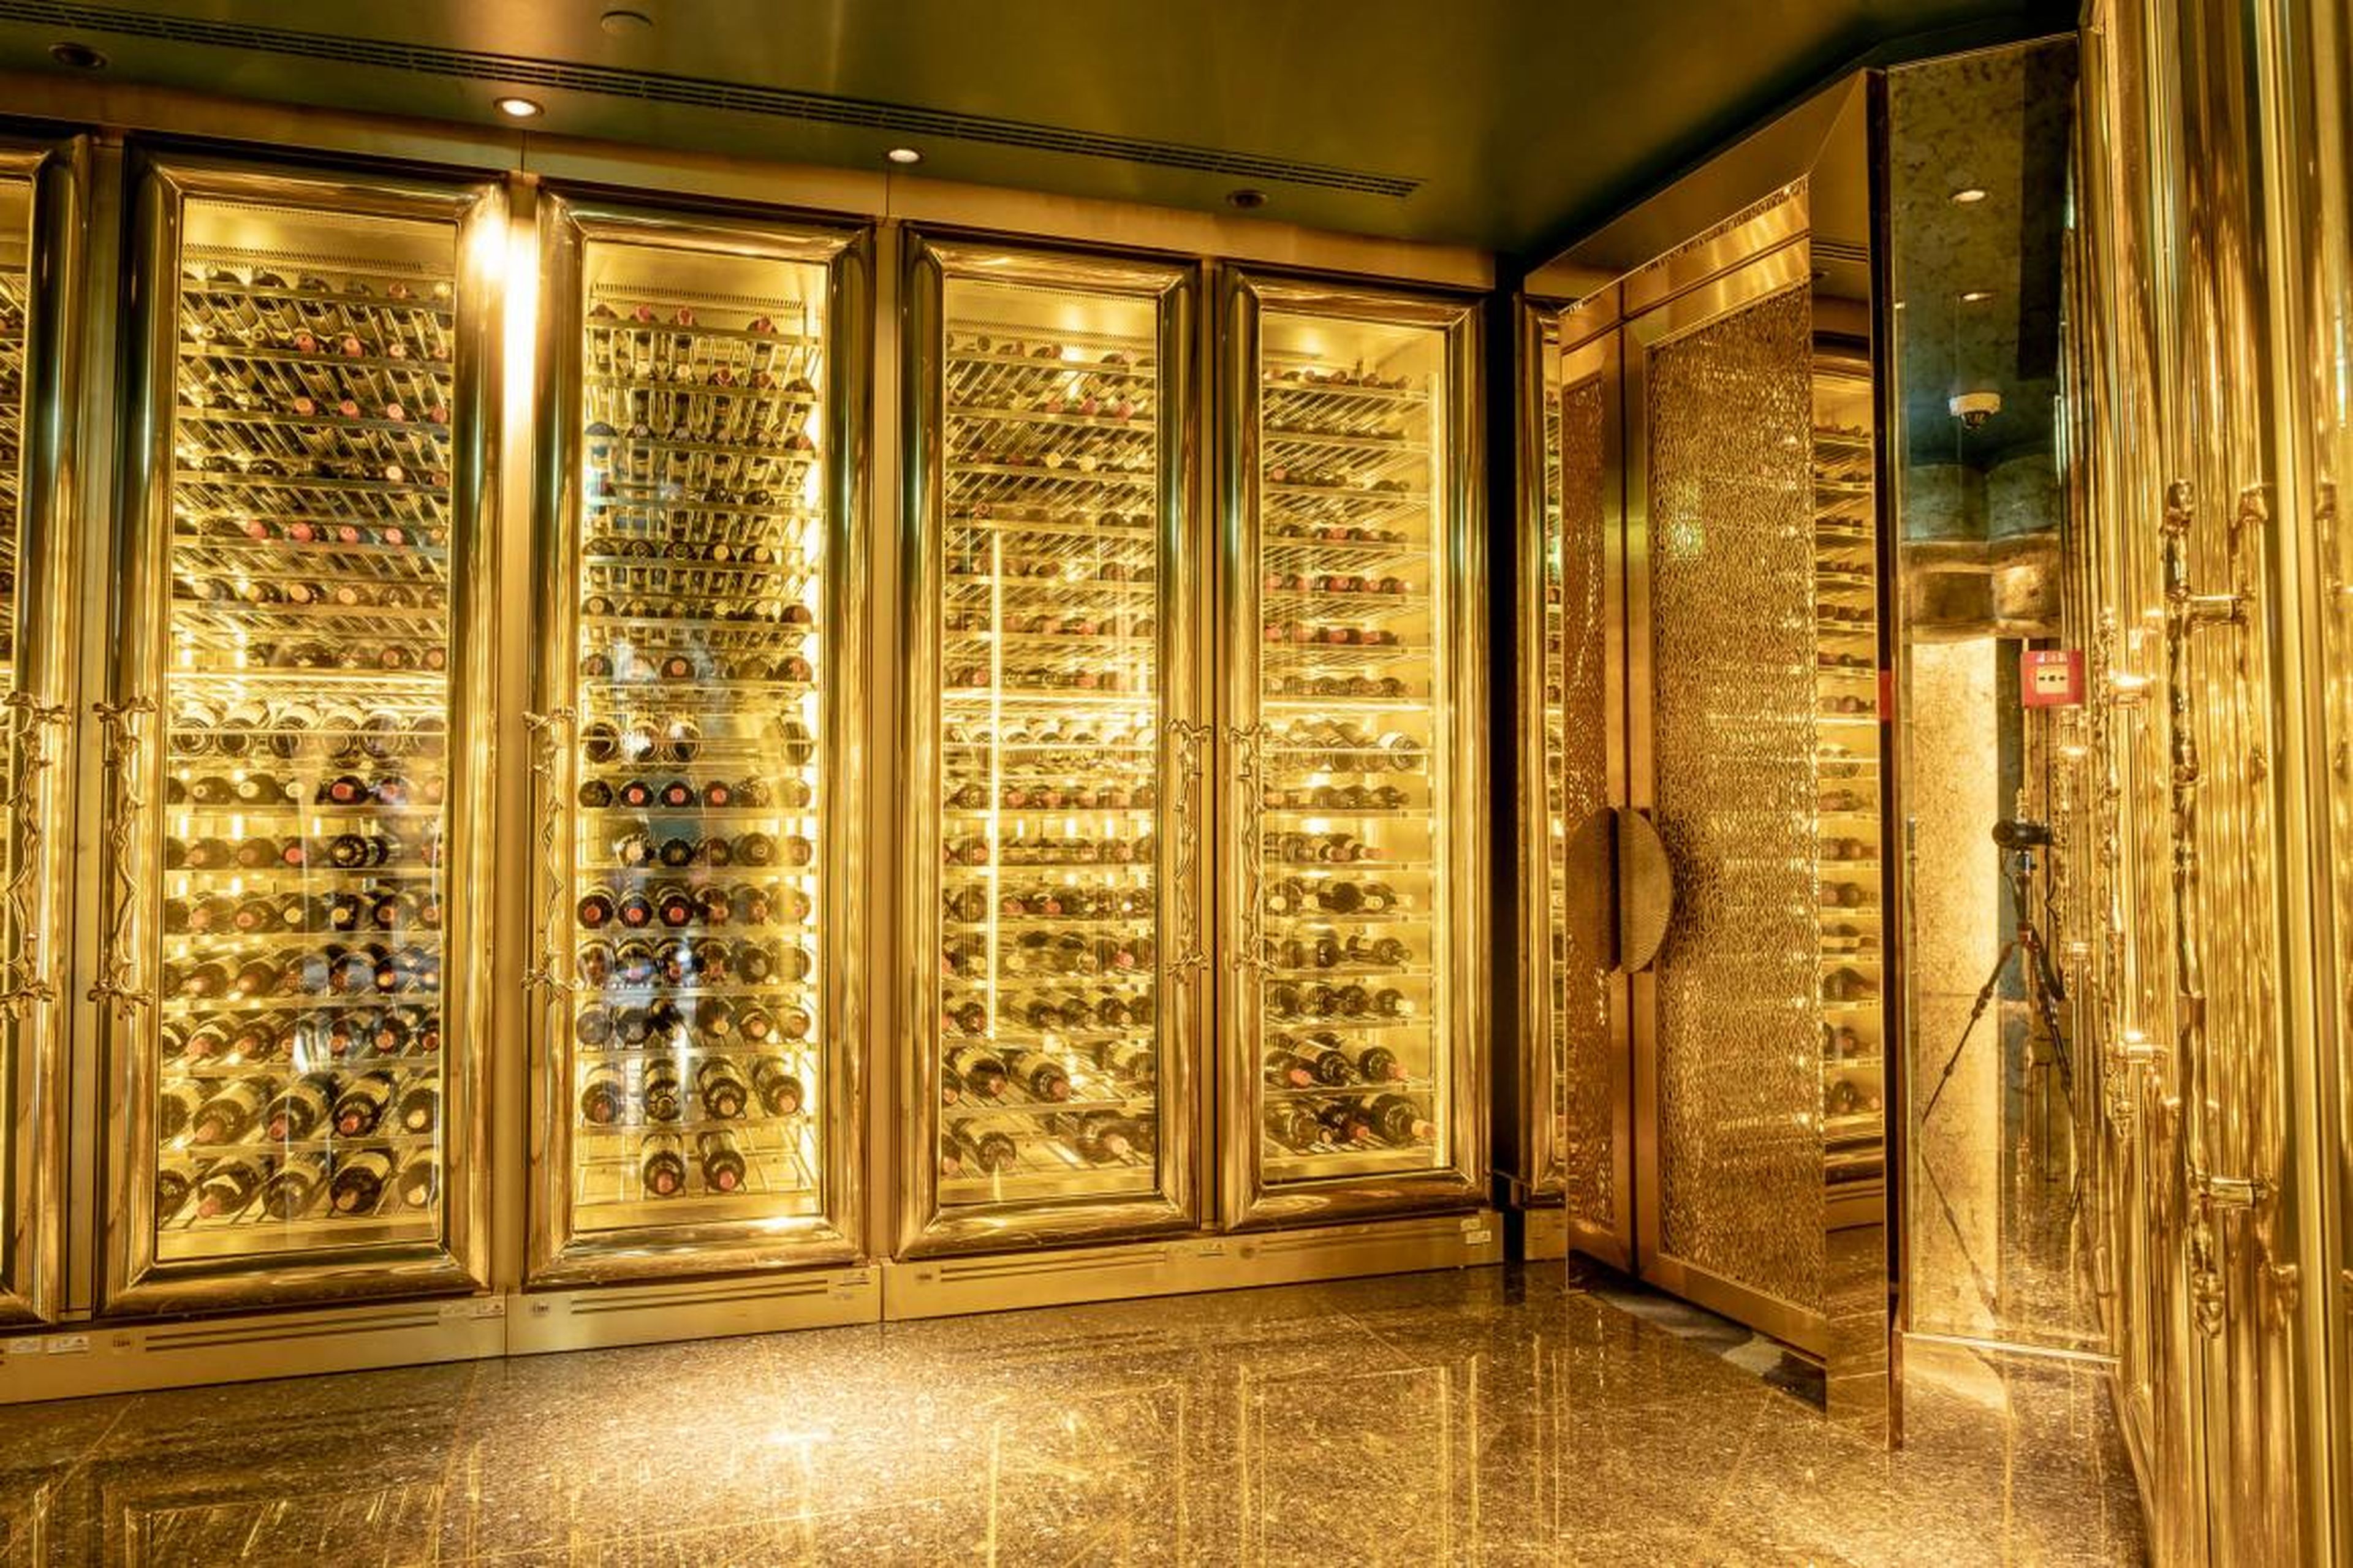 Like everything else in the Burj, the Al Mahara wine racks do, in fact, glitter with gold. It's in spots like this where my brain is caught between "Can only gold be a design aesthetic?" and "Ooh, sparkly wall!"